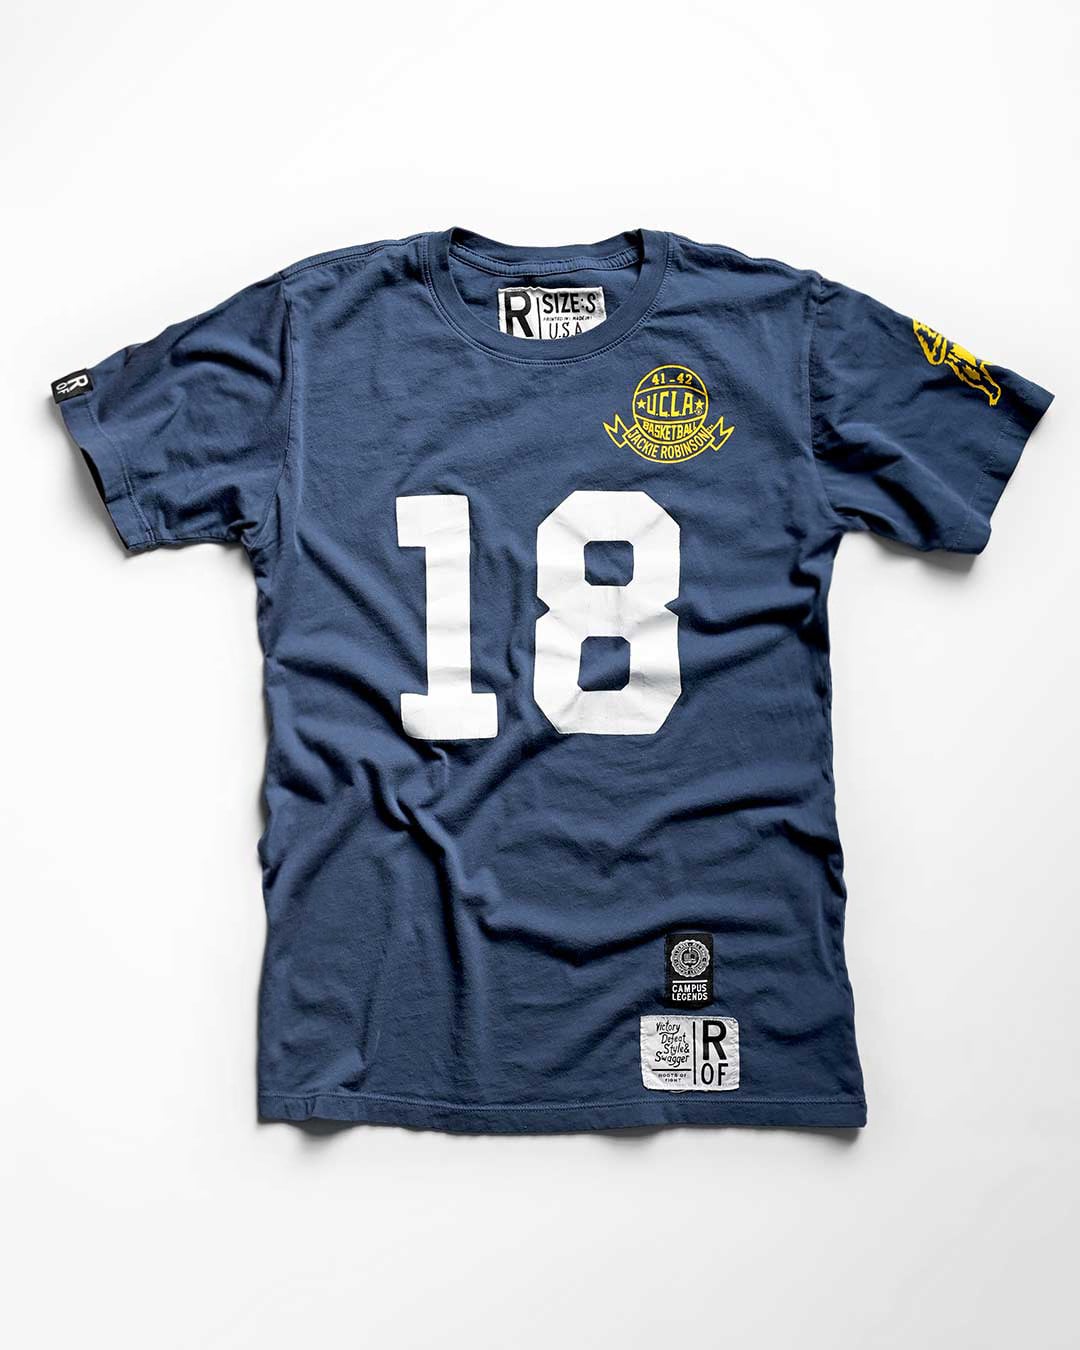 UCLA - Jackie Robinson Basketball #18 Navy Tee - Roots of Fight Canada